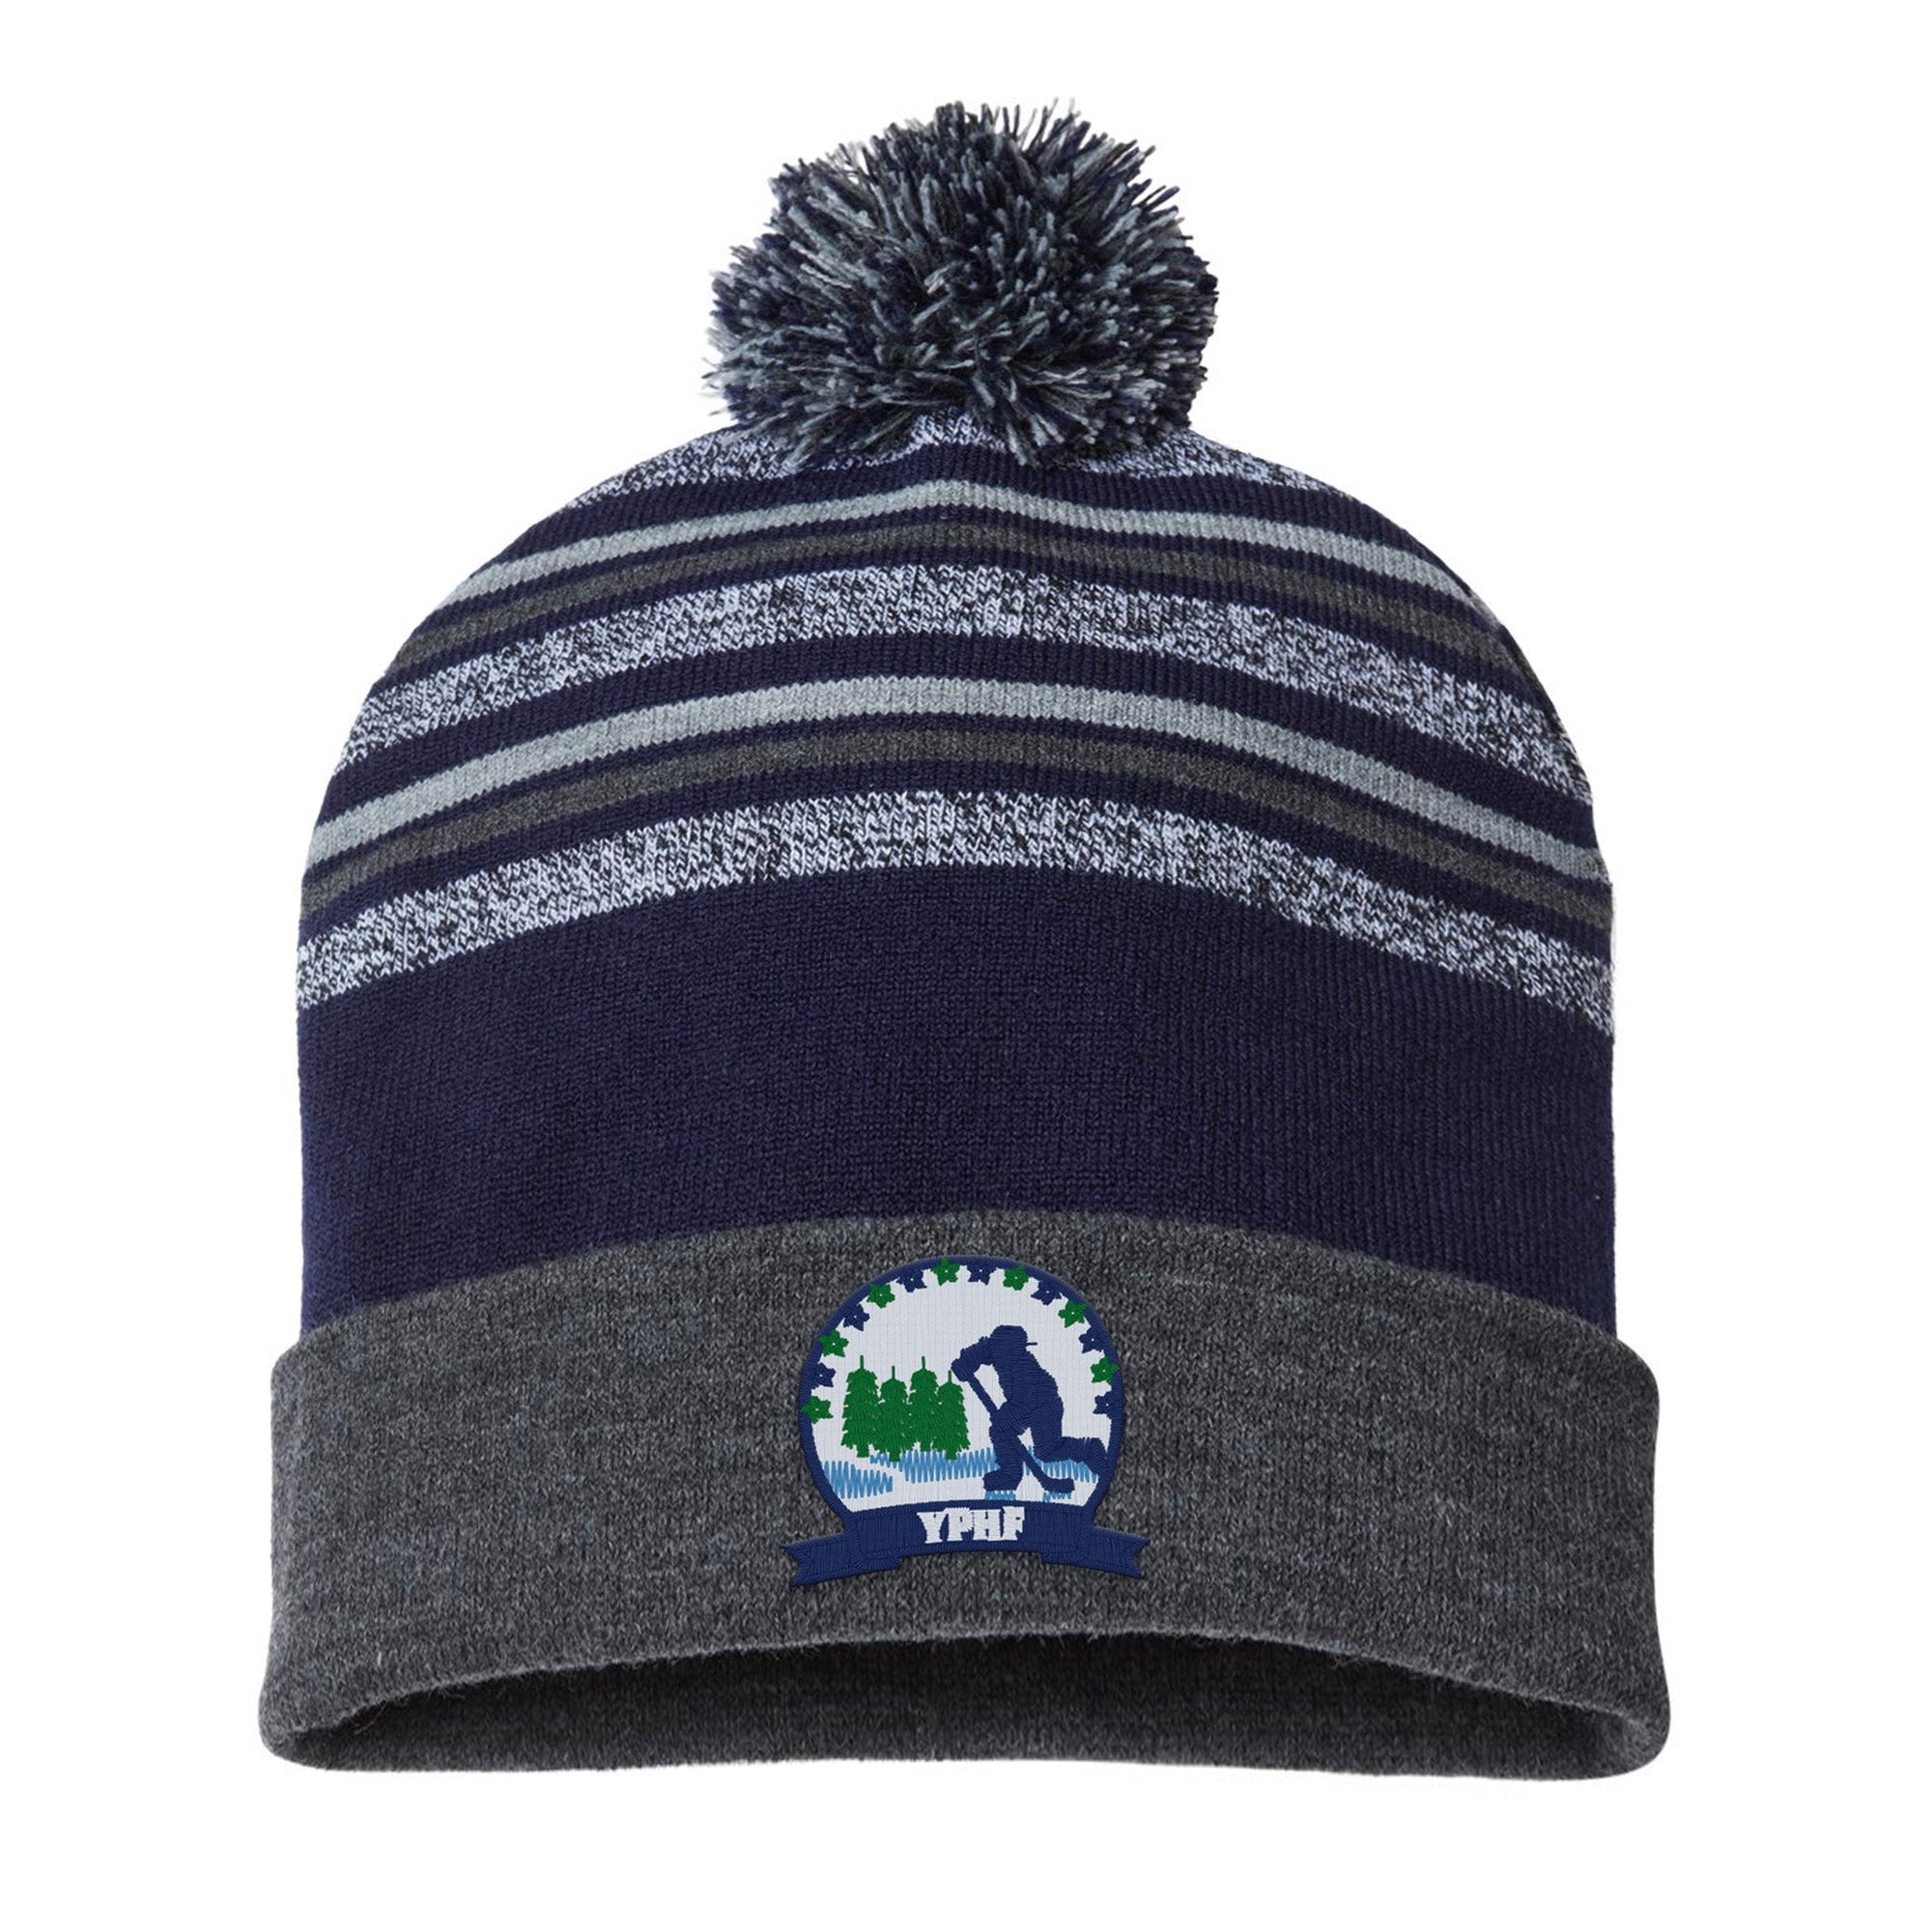 Rugby Imports YPHF Heather Striped Beanie